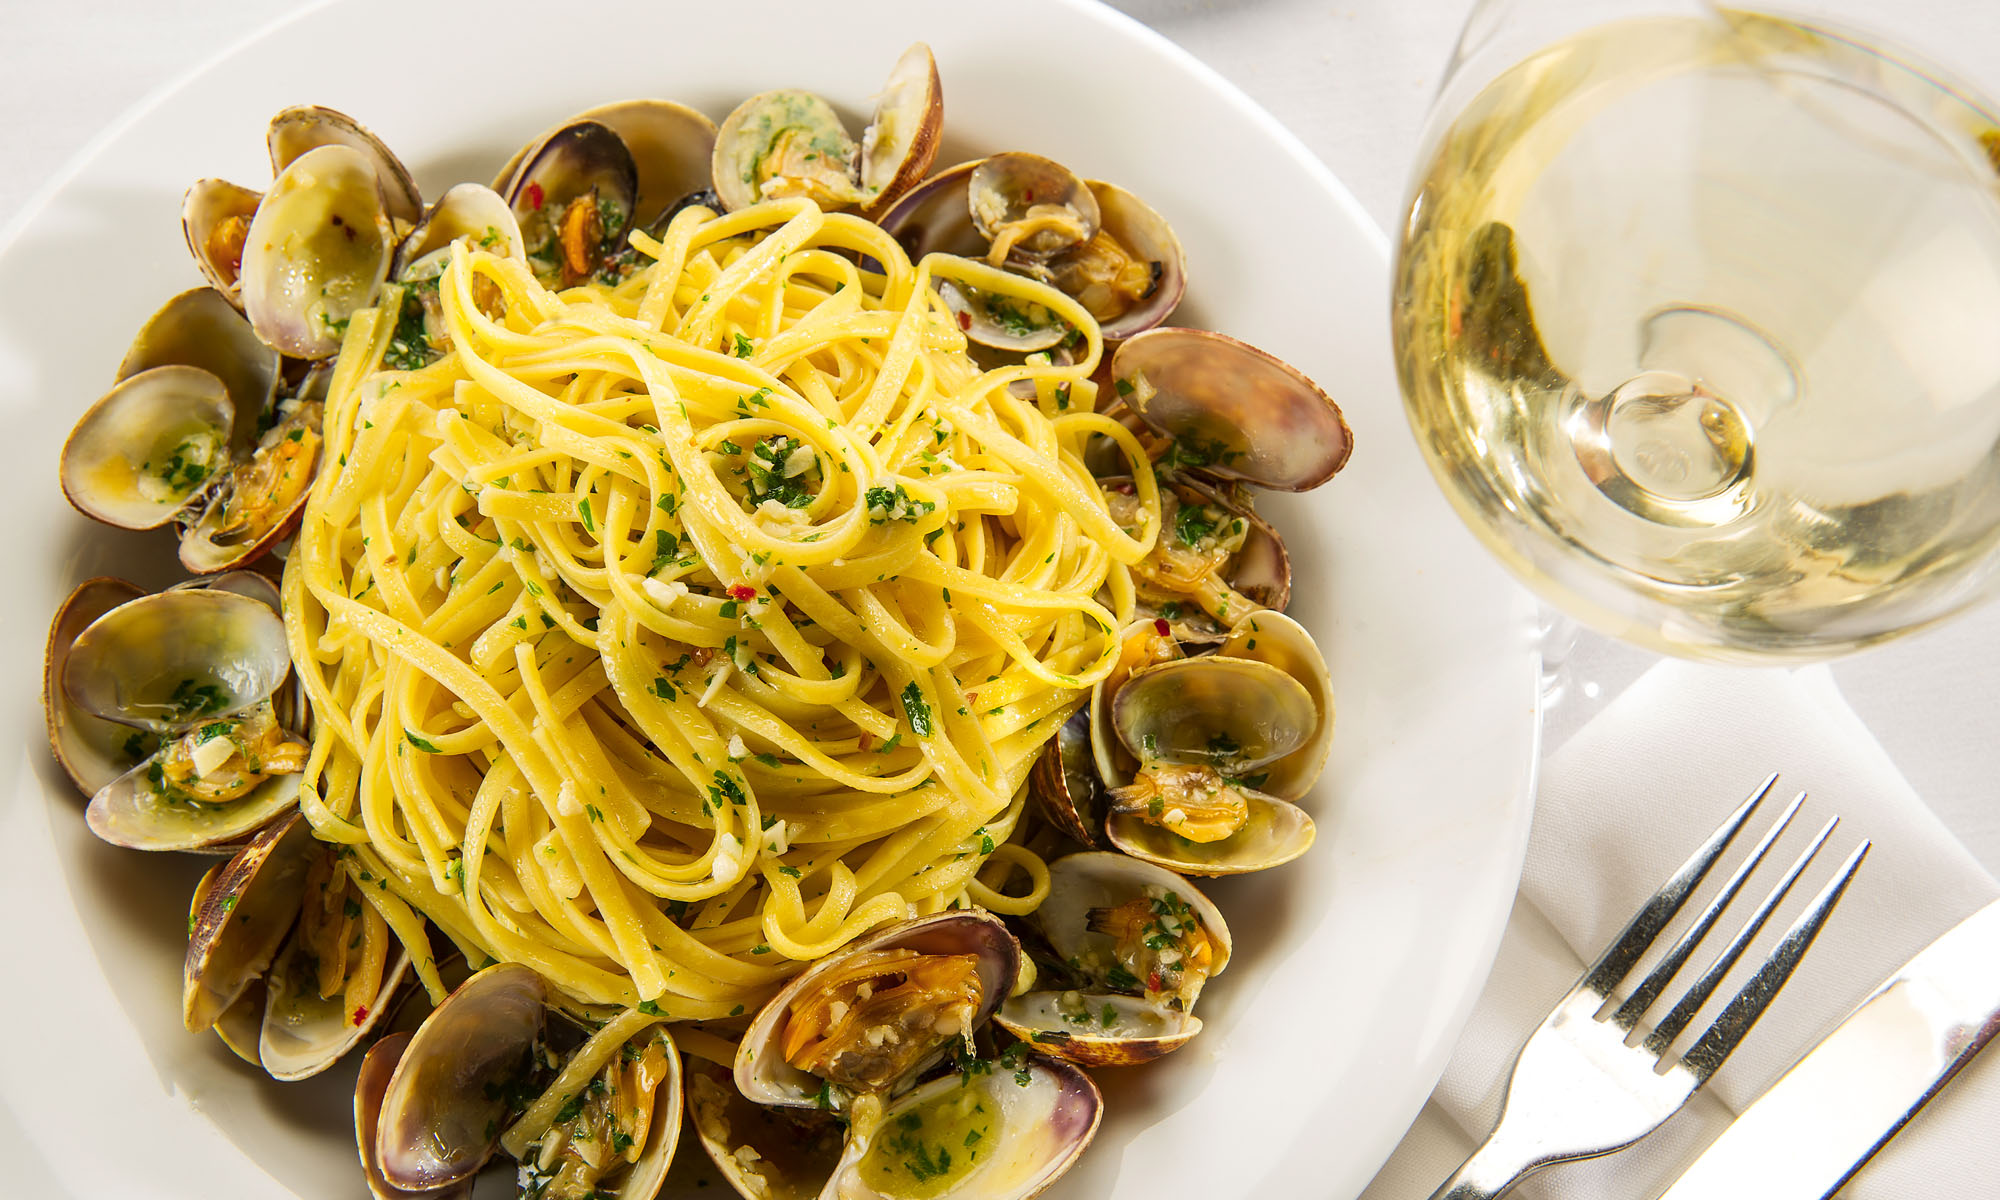 Pasta with clams on a white plate with white wine on the side.